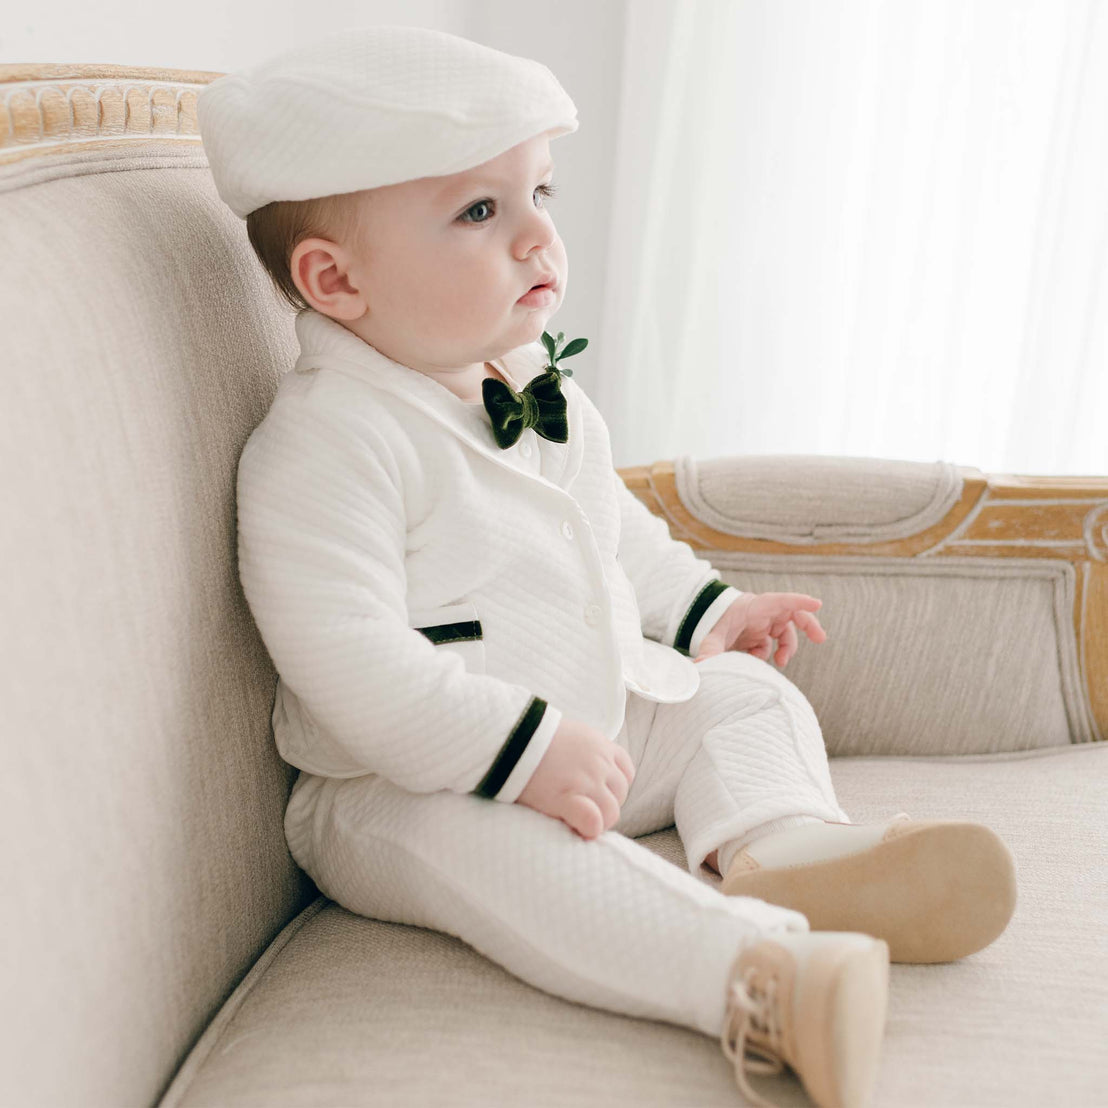 A baby dressed in a Noah 3-Piece Suit | Green Trim with a hat and bow tie, sitting pensively on a cream sofa in a bright room for a christening ceremony.